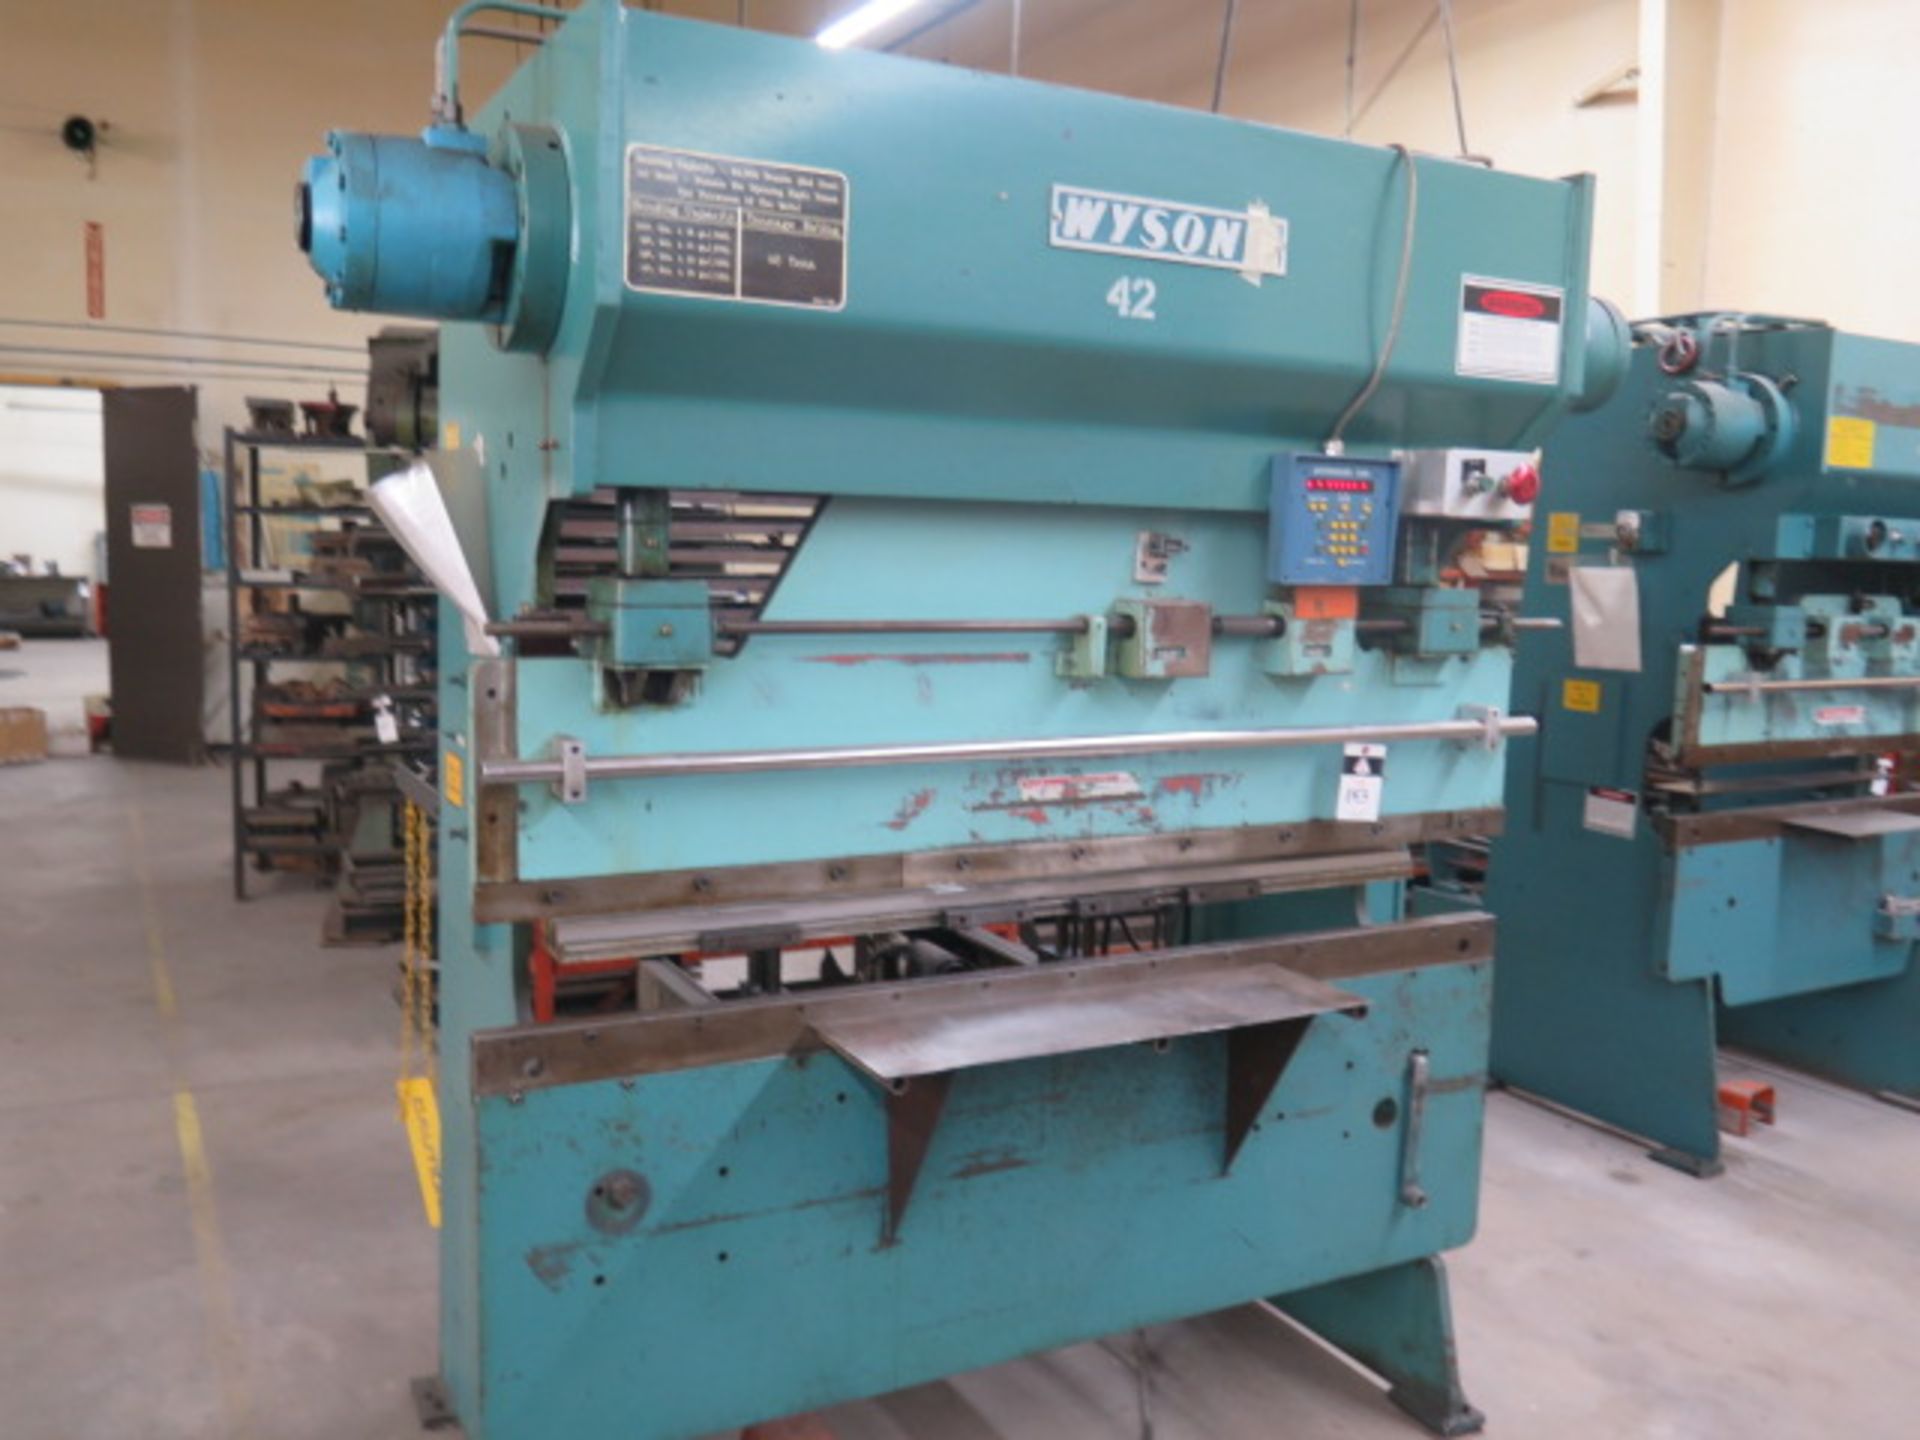 Wysong H-4072 40 Ton x 72” CNC Press Brake s/n HPB13-237 w/ Autogauge 524 Controls, SOLD AS IS - Image 2 of 15